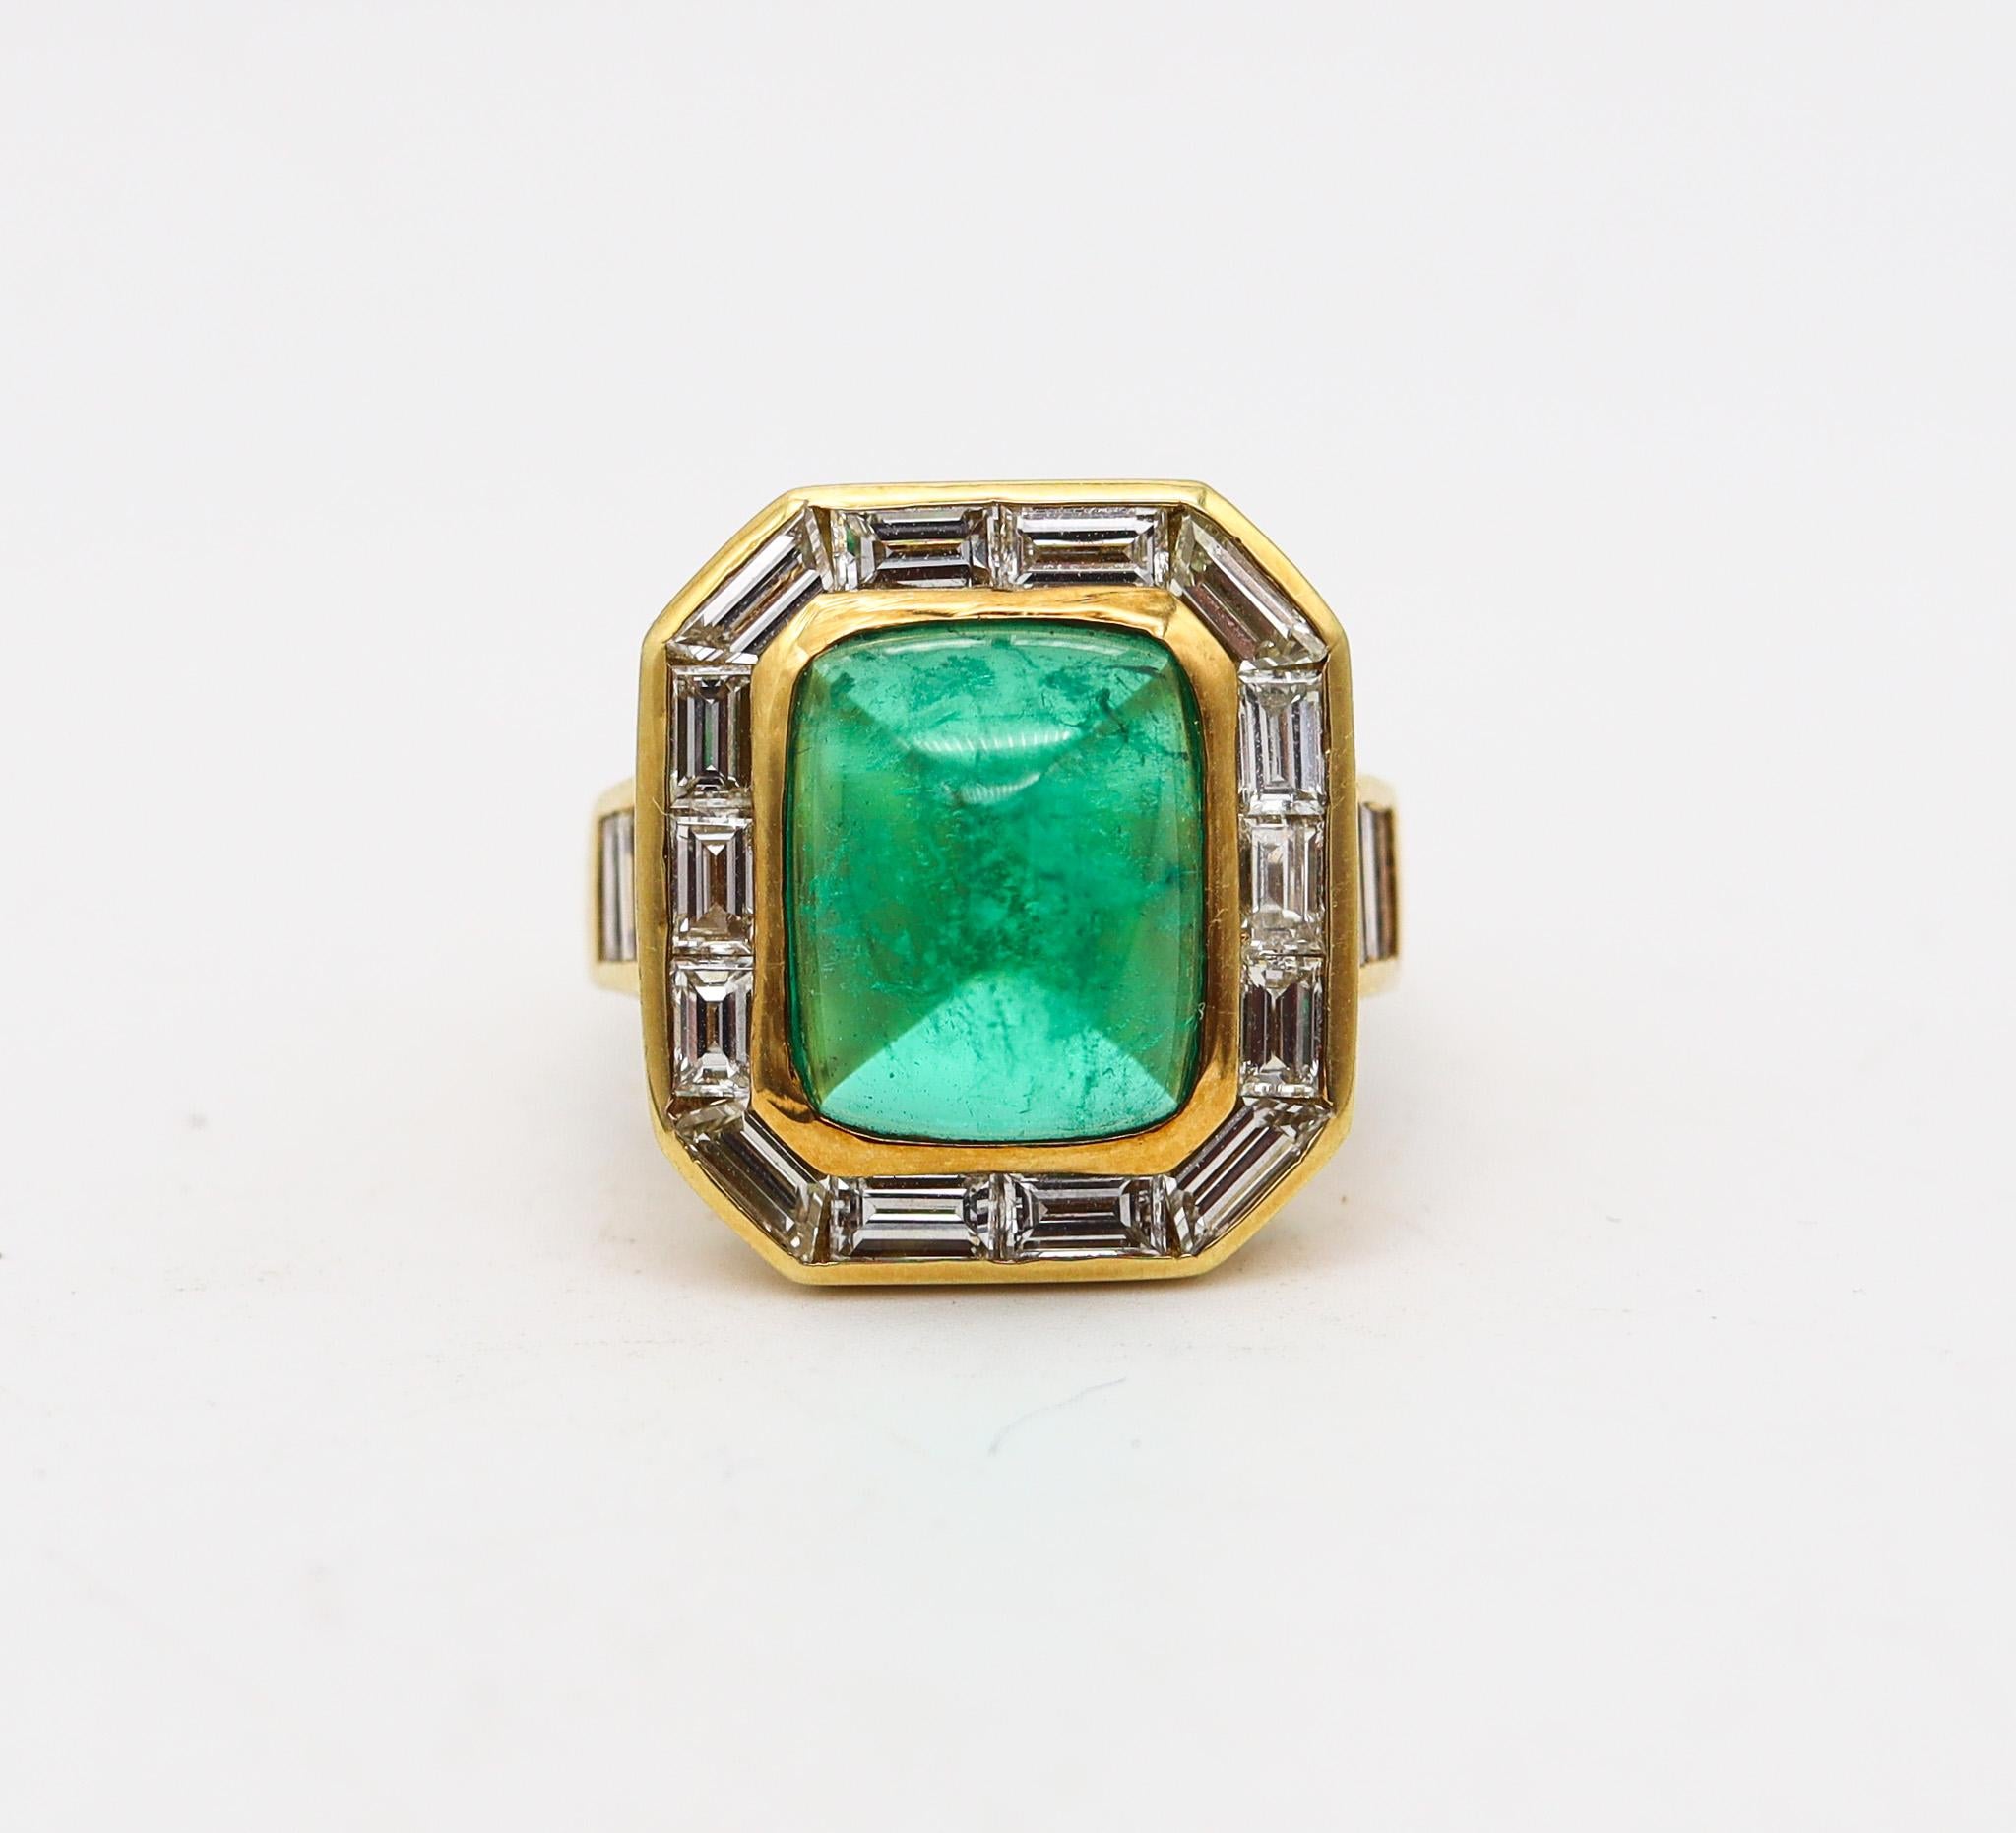 Modernist Bvlgari Cocktail Ring In 18Kt Yellow Gold With 9.04 Ctw In Diamonds And Emerald